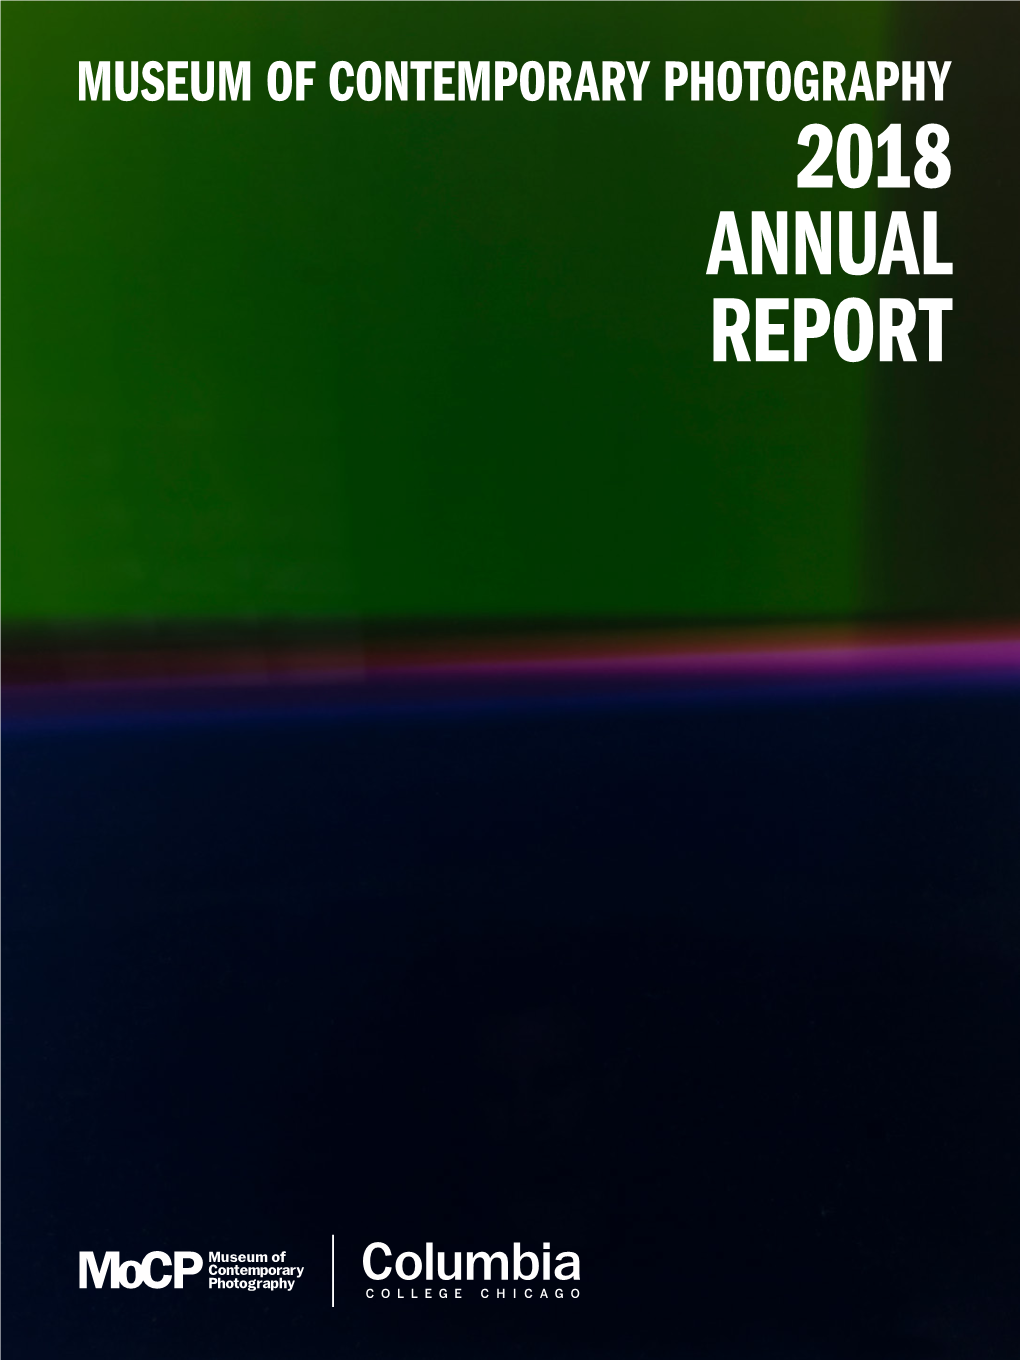 Download a PDF of Our 2018 Annual Report